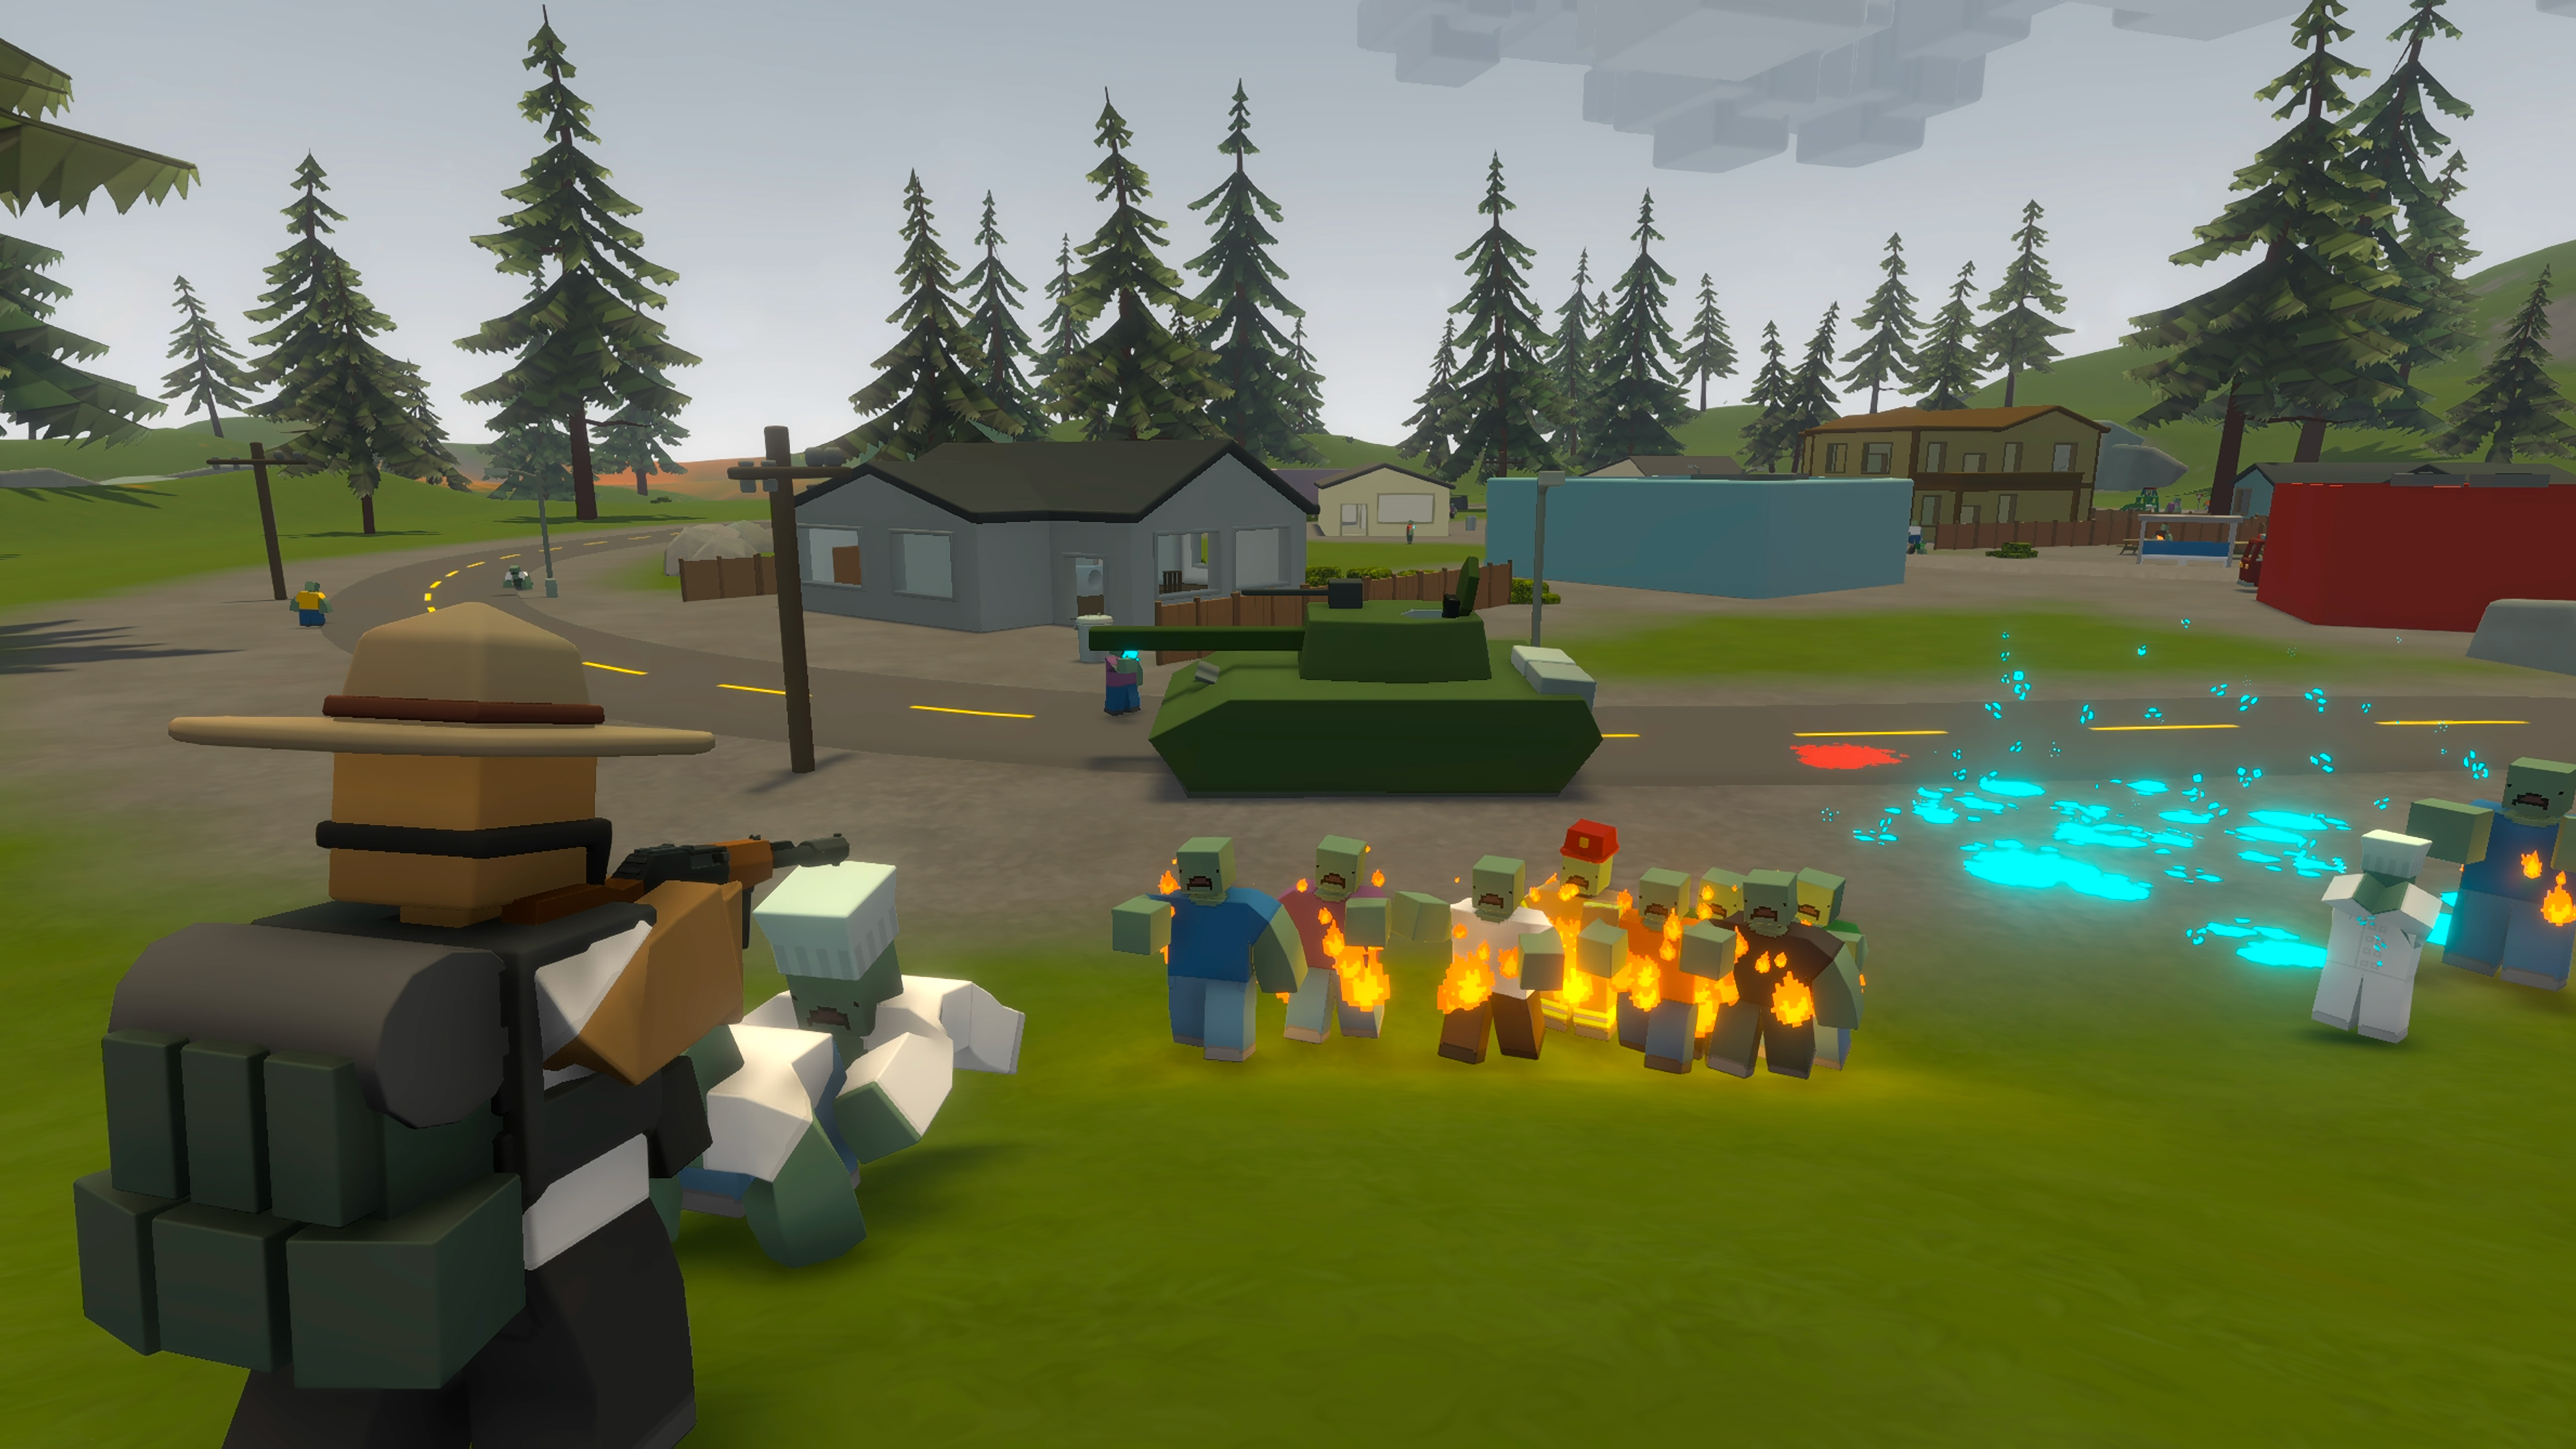 is unturned on ps4